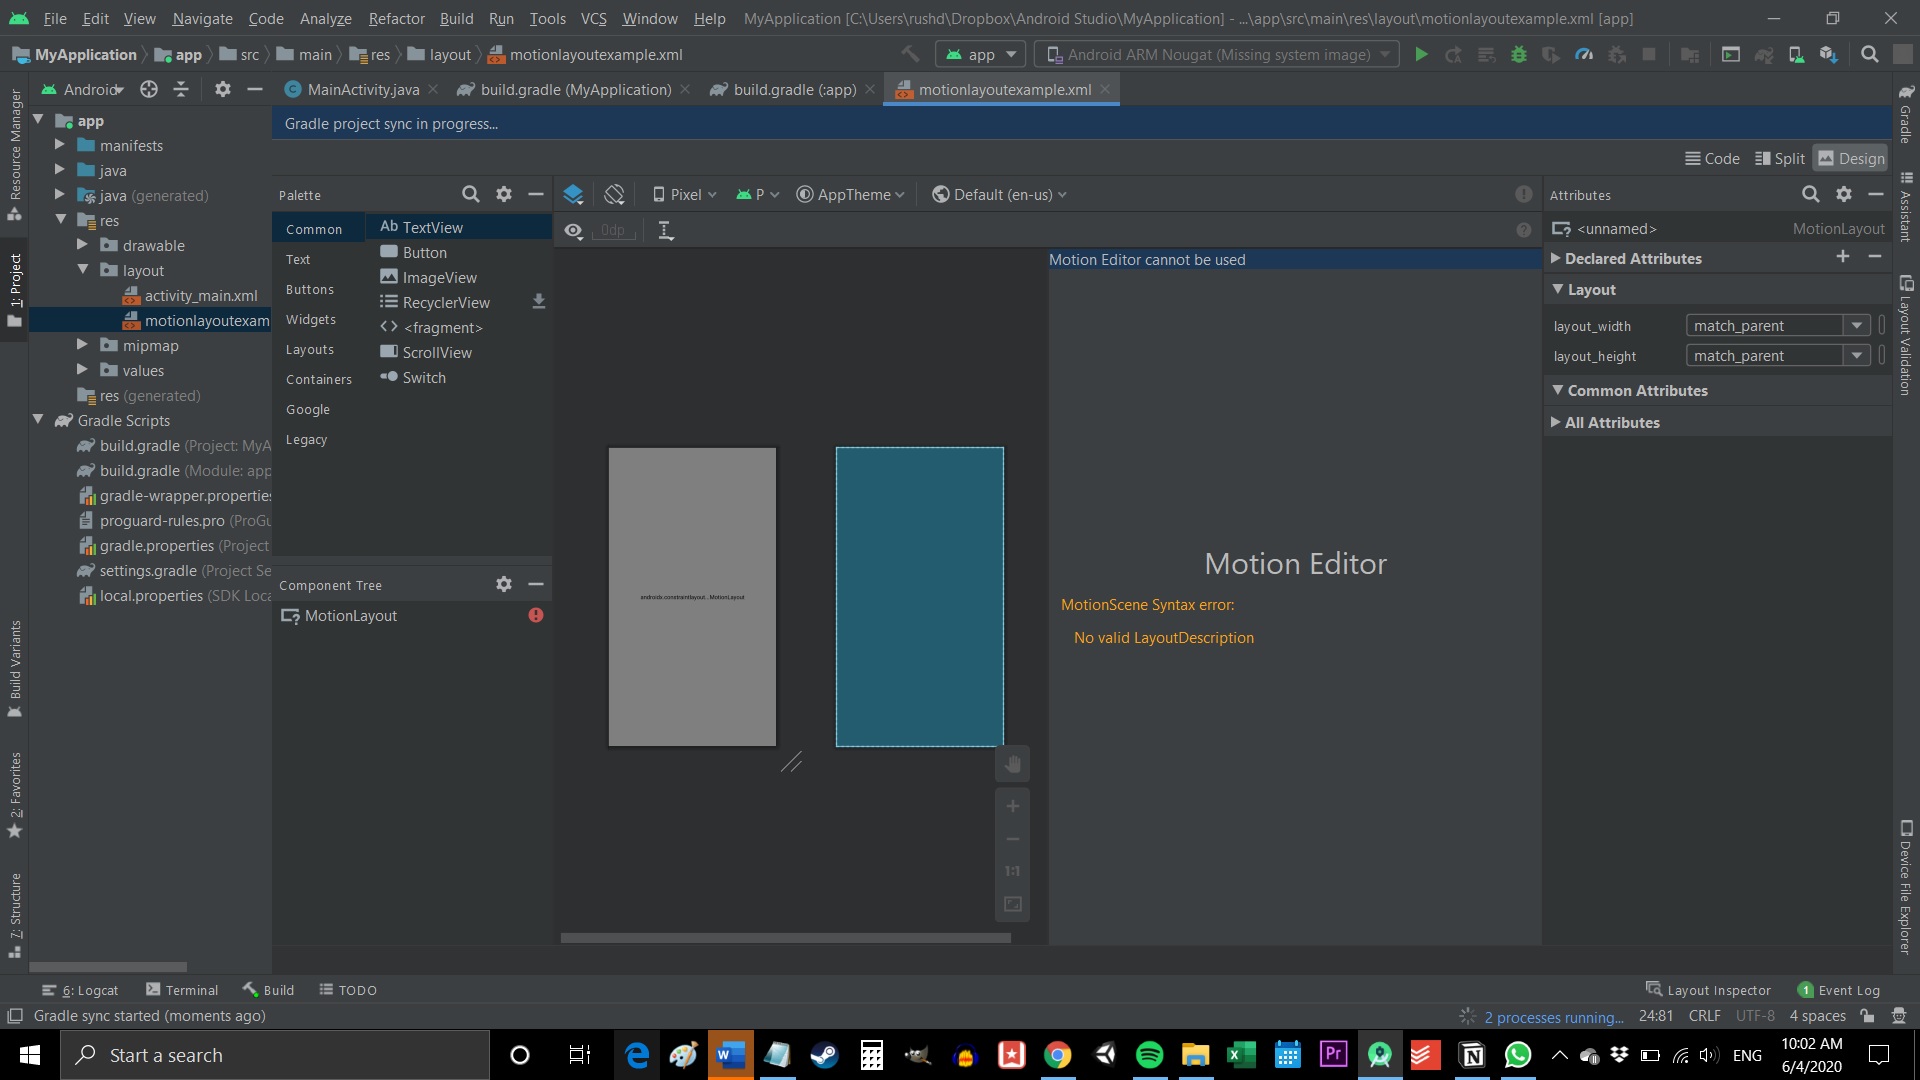 Behold Motion Editor